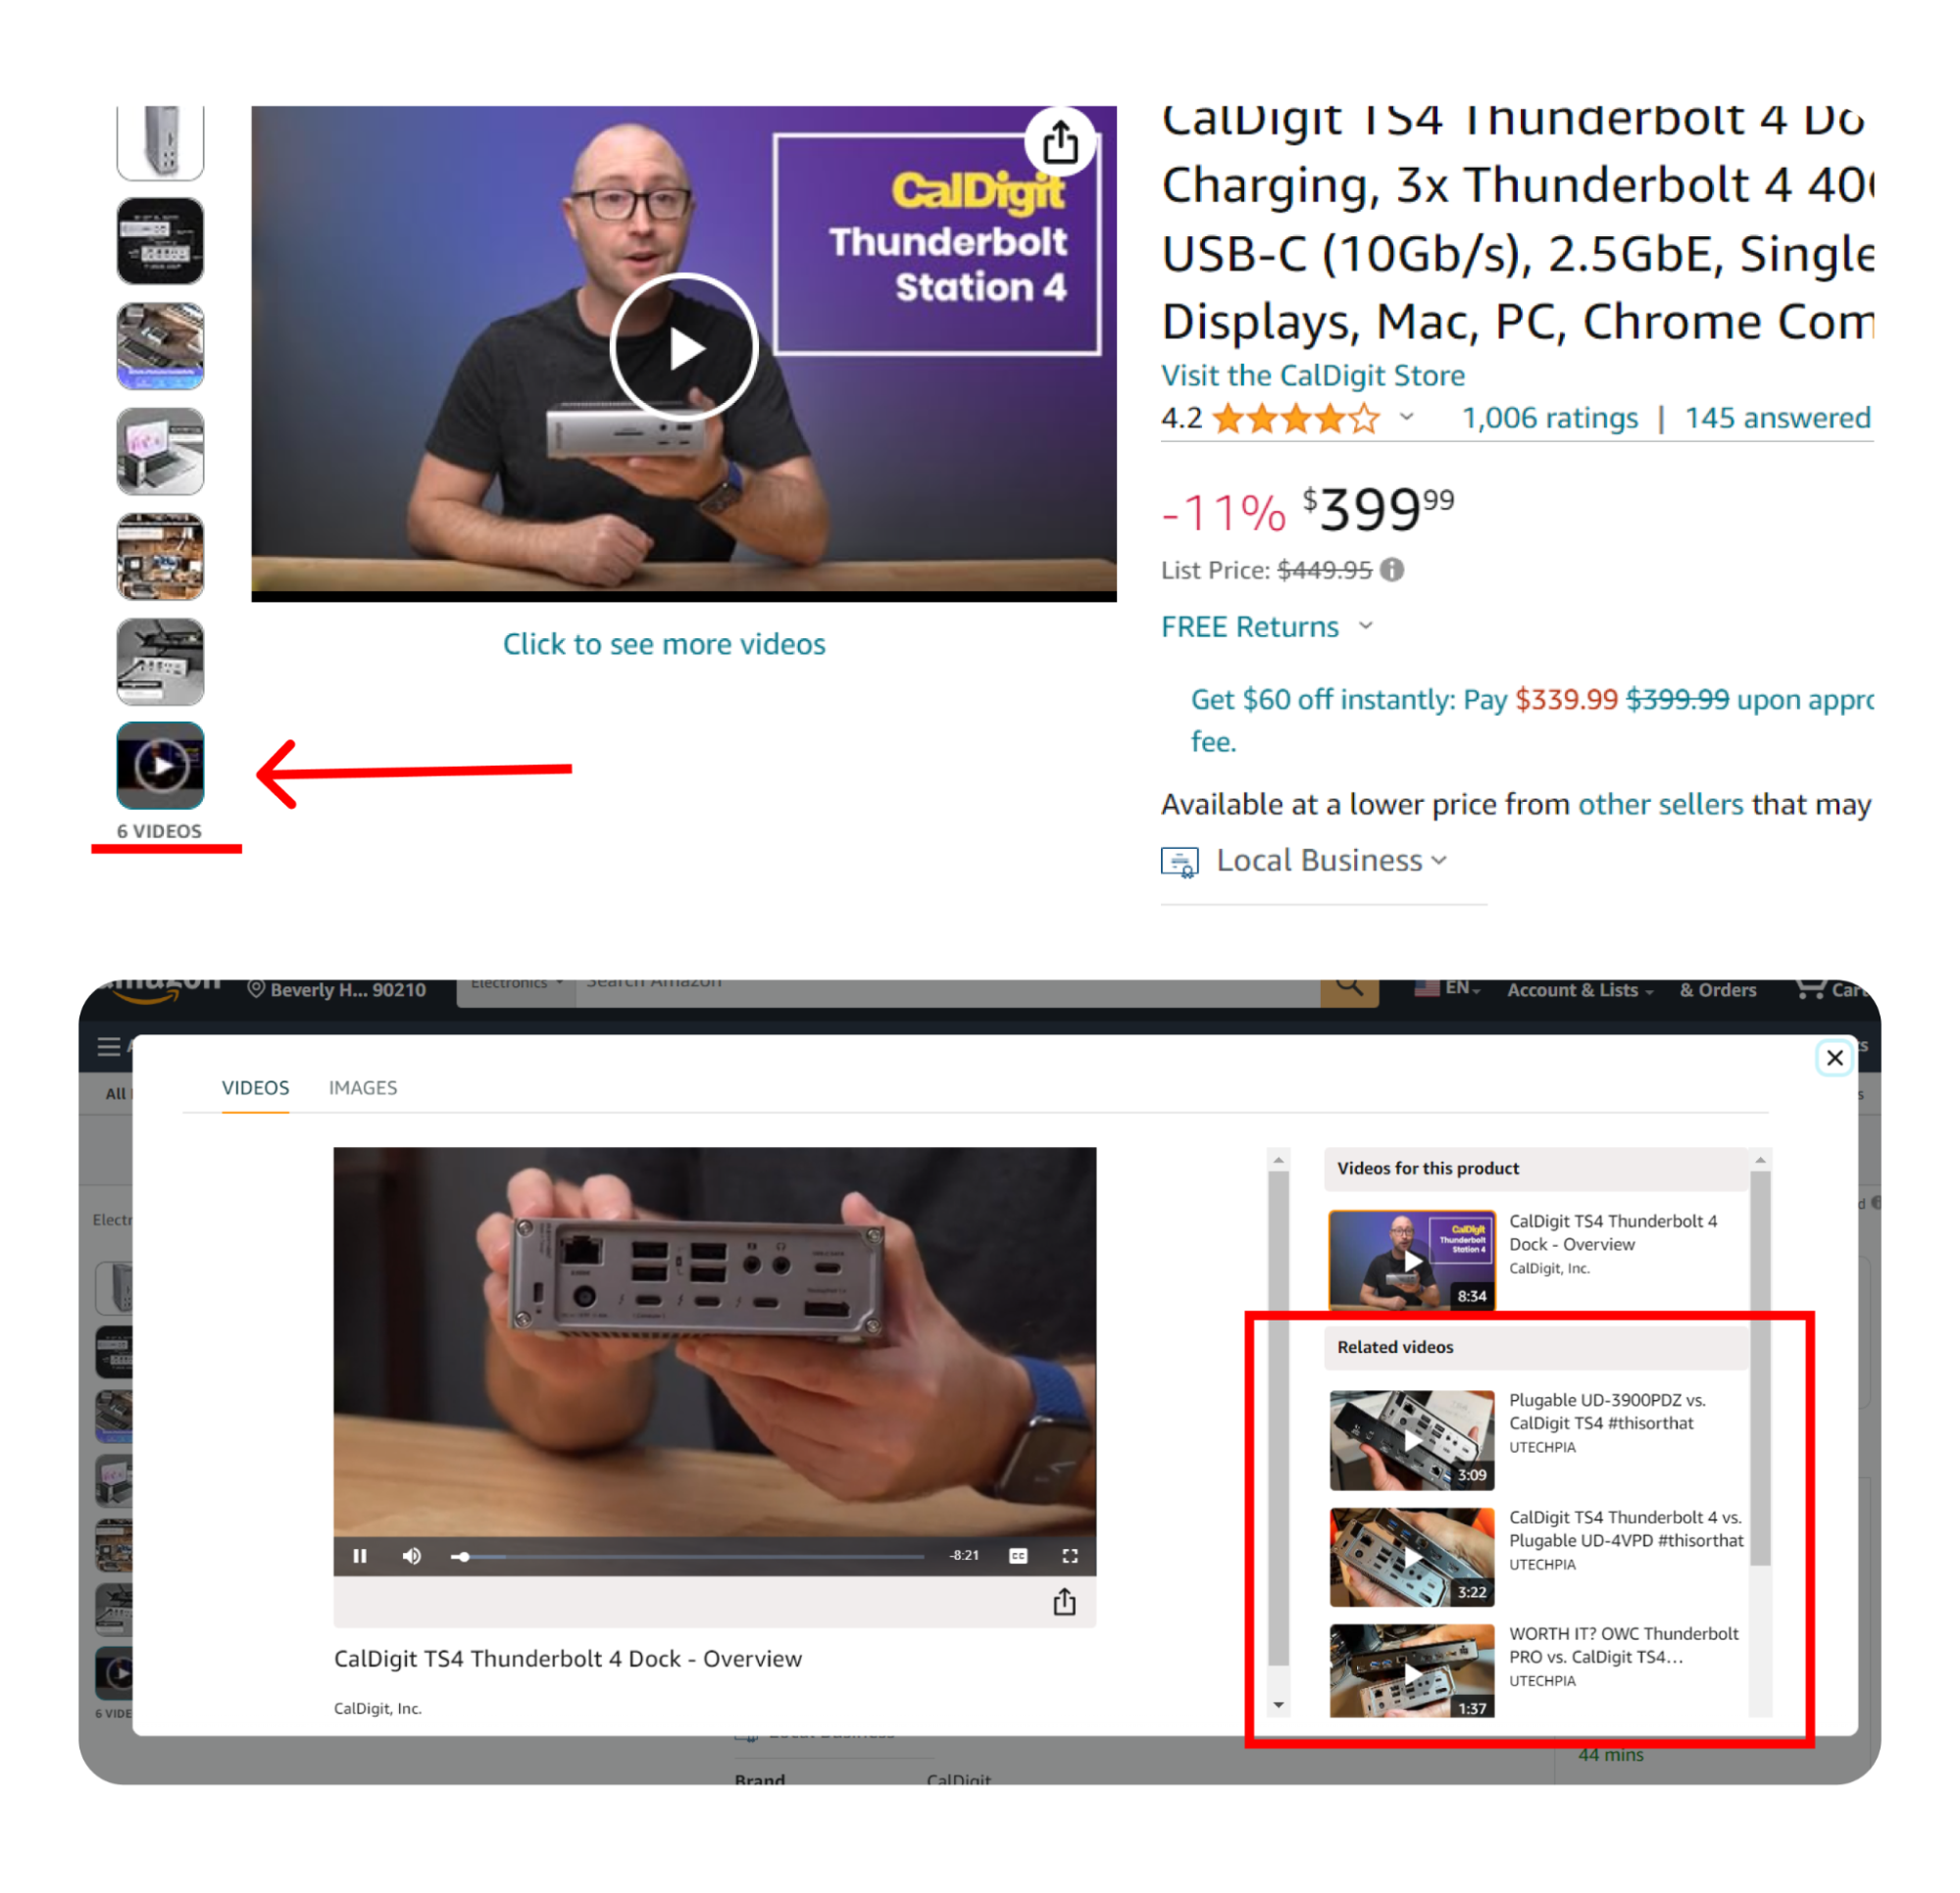 Screenshots of Amazon Influencer videos located in a details page of an Amazon product.